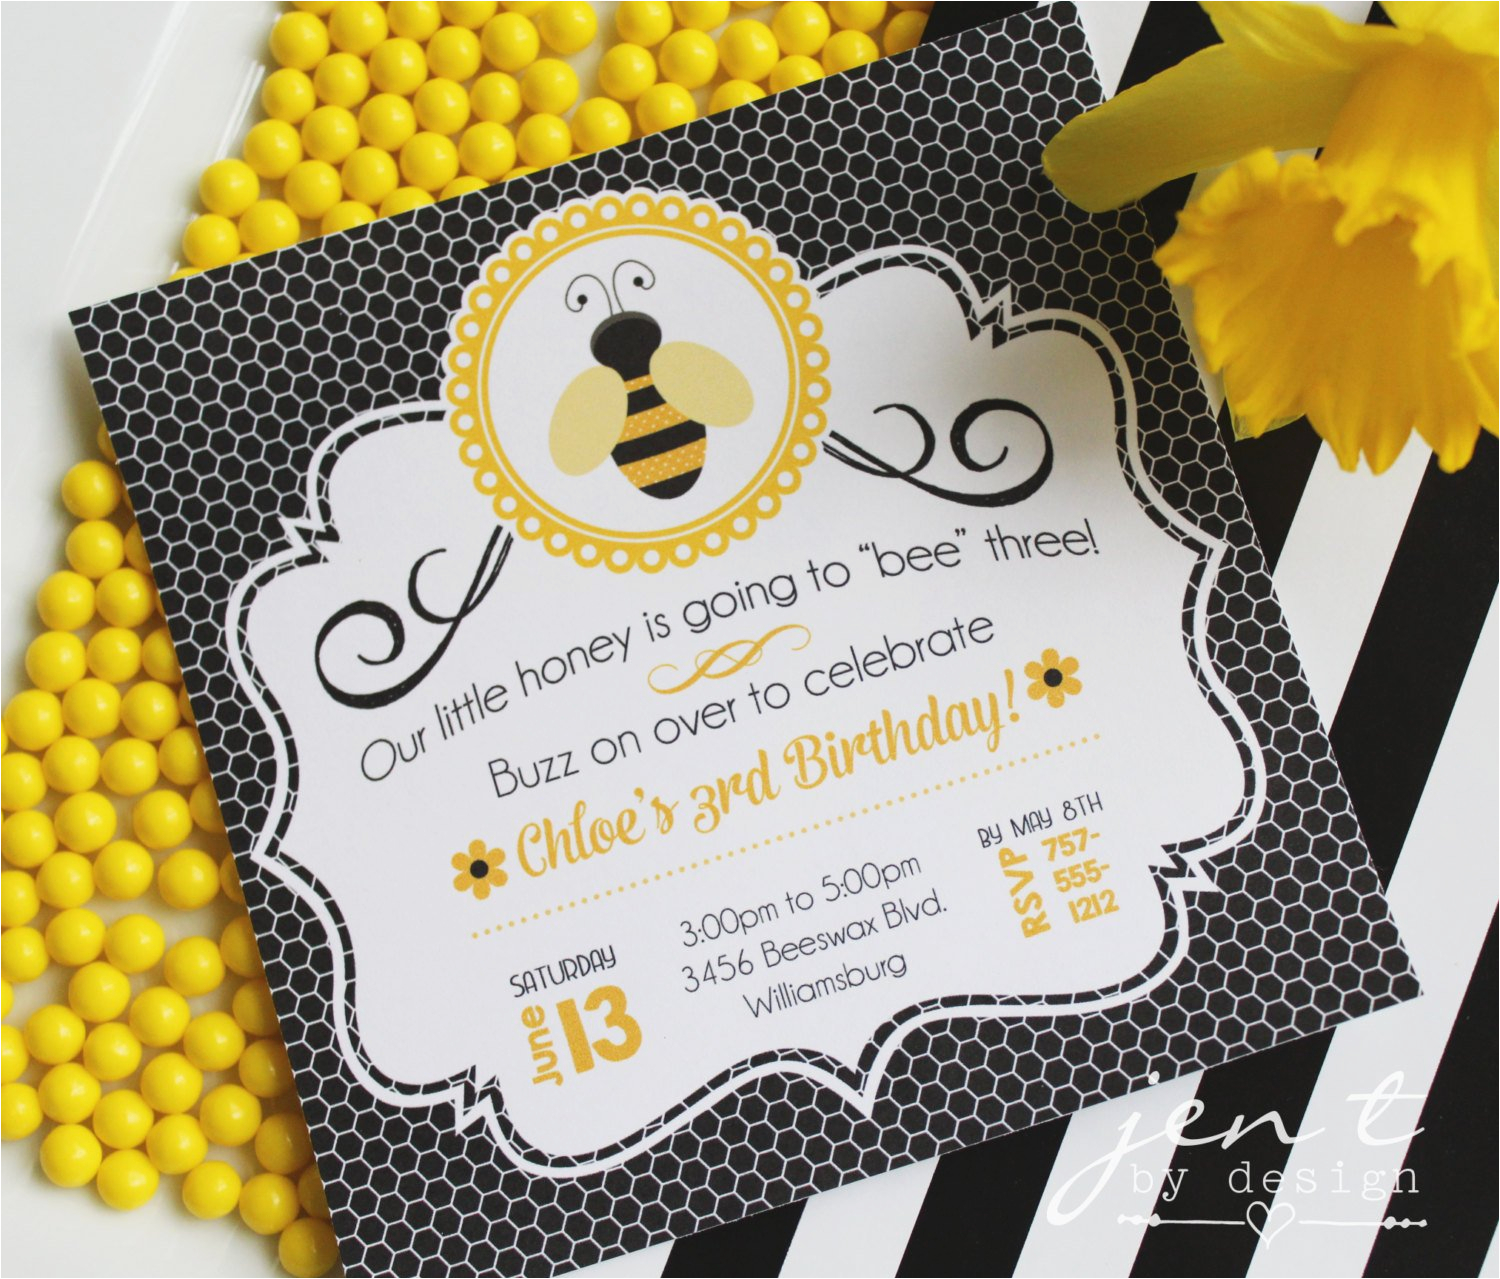 bumble bee party invitations